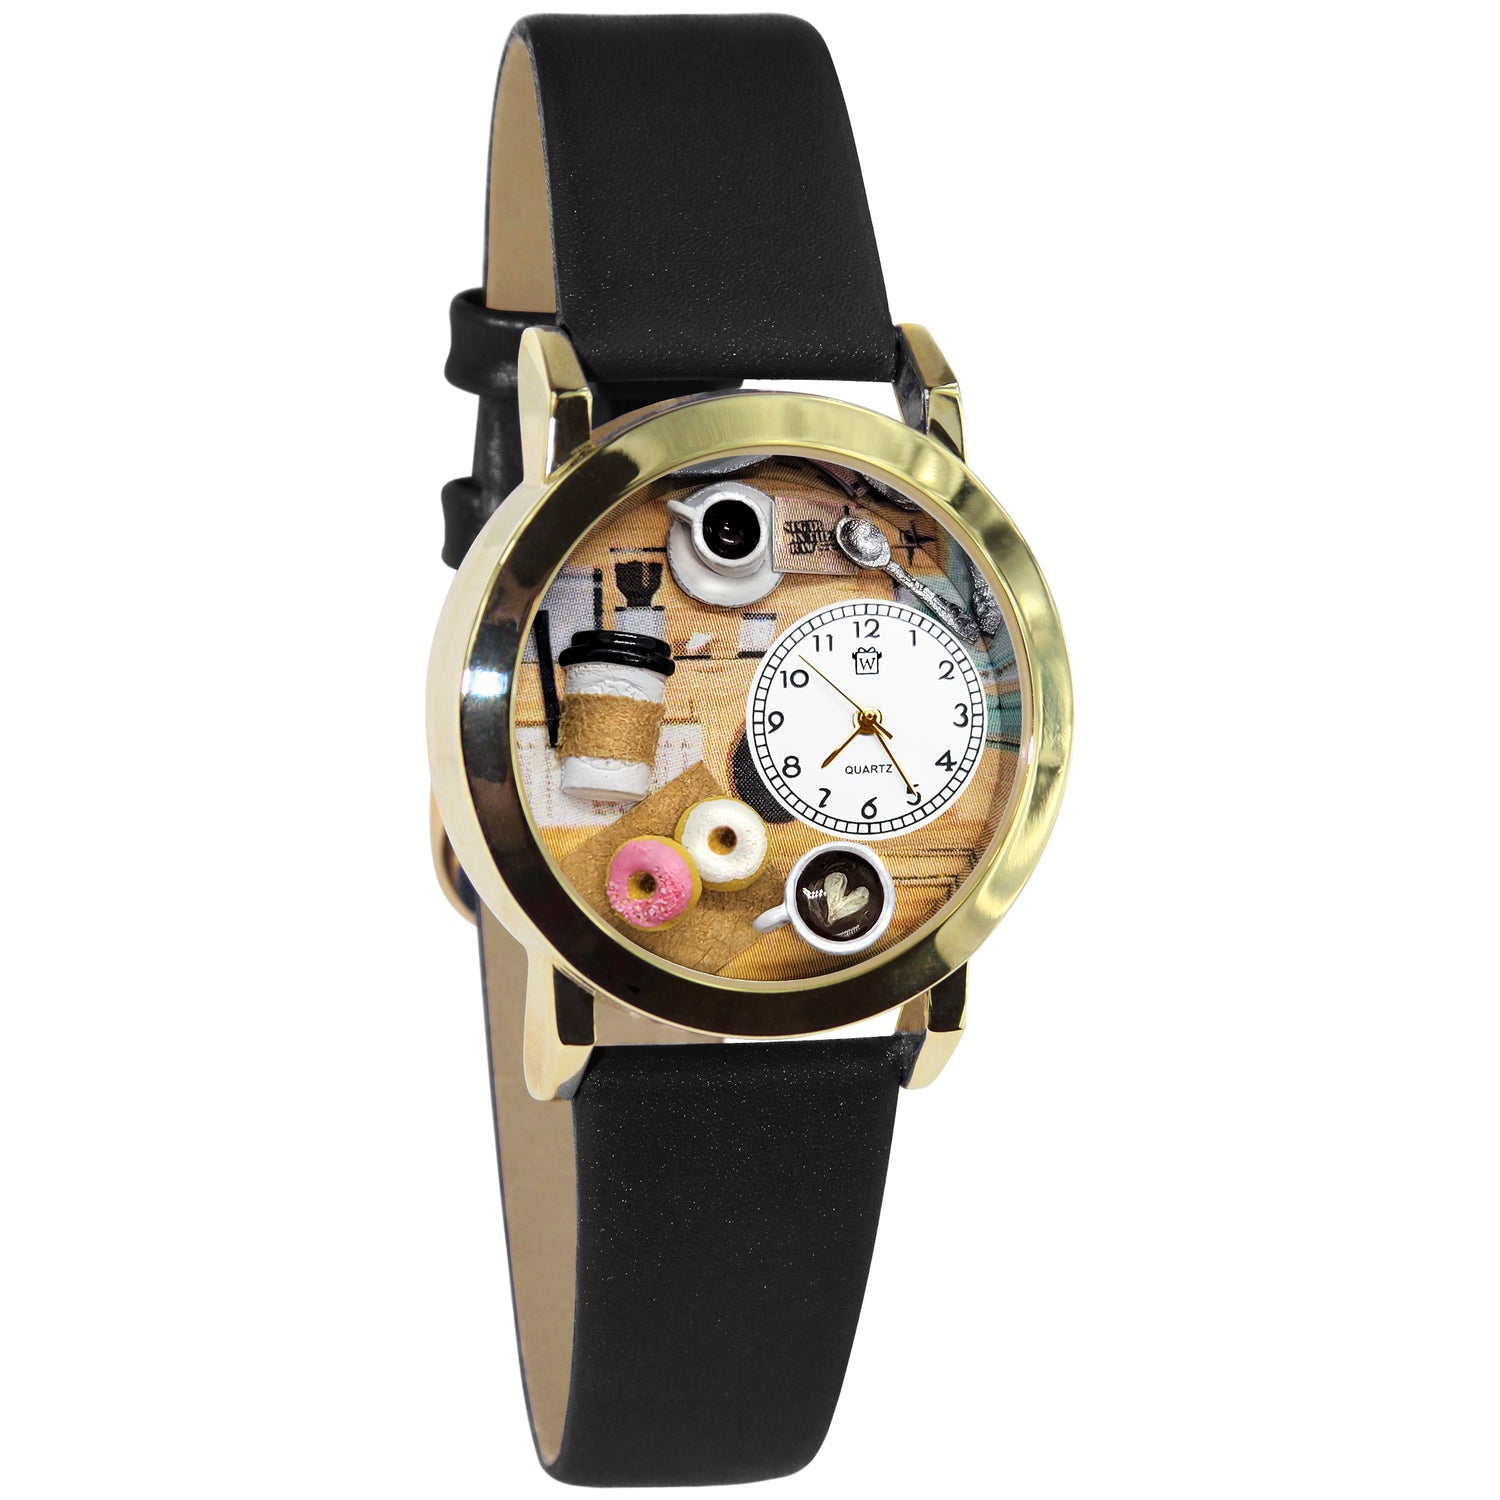 Whimsical Gifts | Coffee Lover 3D Watch Small Style | Handmade in USA | Hobbies & Special Interests | Food & Wine | Novelty Unique Fun Miniatures Gift | Gold Finish Black Leather Watch Band